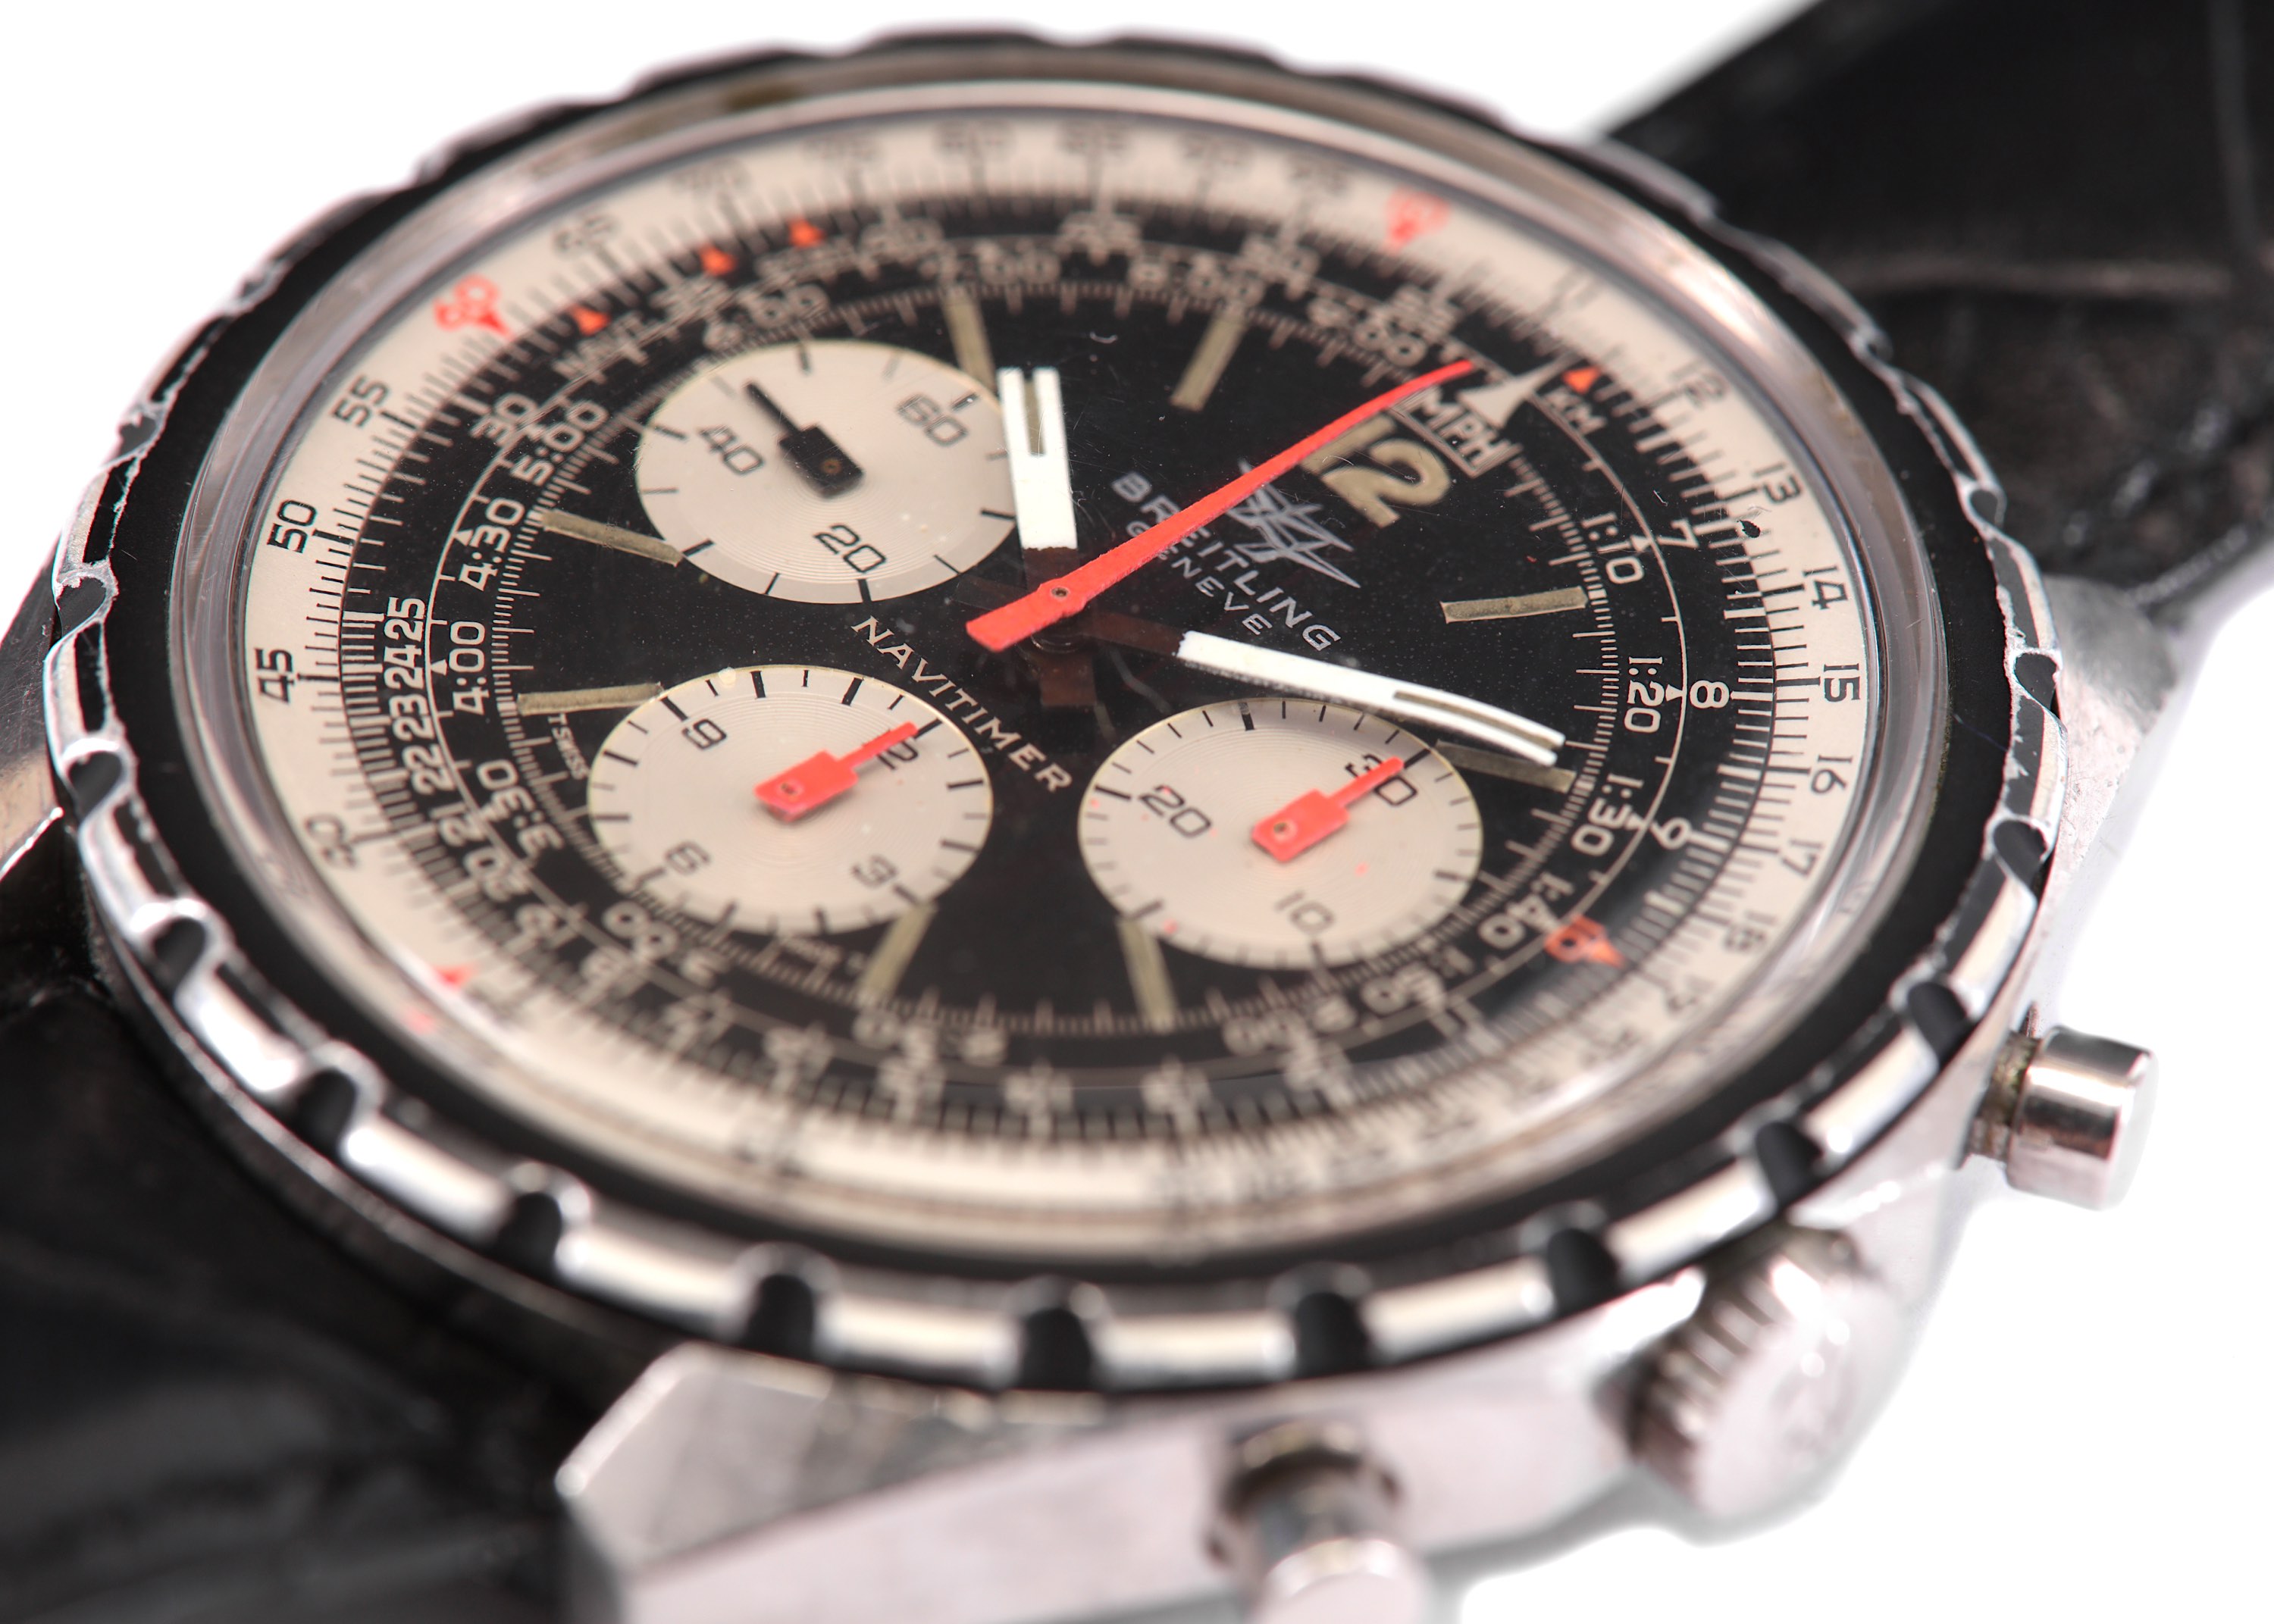 BREITLING. A OVERSIZED STAINLESS STEEL MANUAL WIND CHRONOGRAPH WRISTWATCH. Date: Circa 1967. - Image 5 of 6